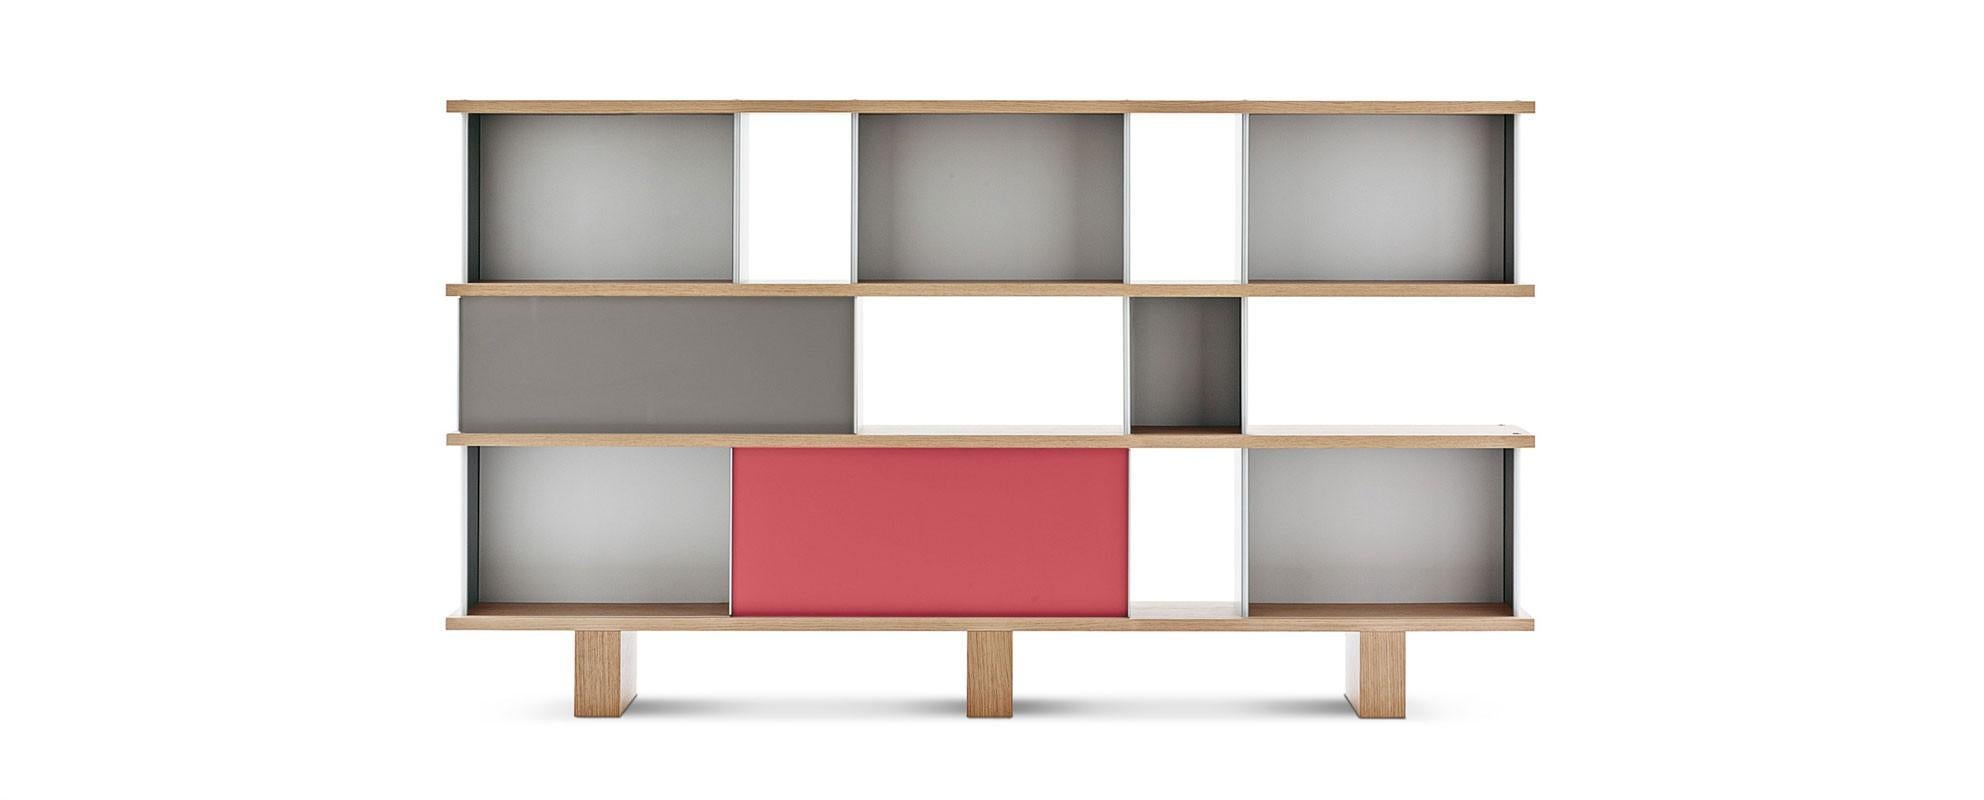 Charlotte Perriand Nuage Shelving Unit, Wood and Aluminium by Cassina In New Condition For Sale In Barcelona, Barcelona